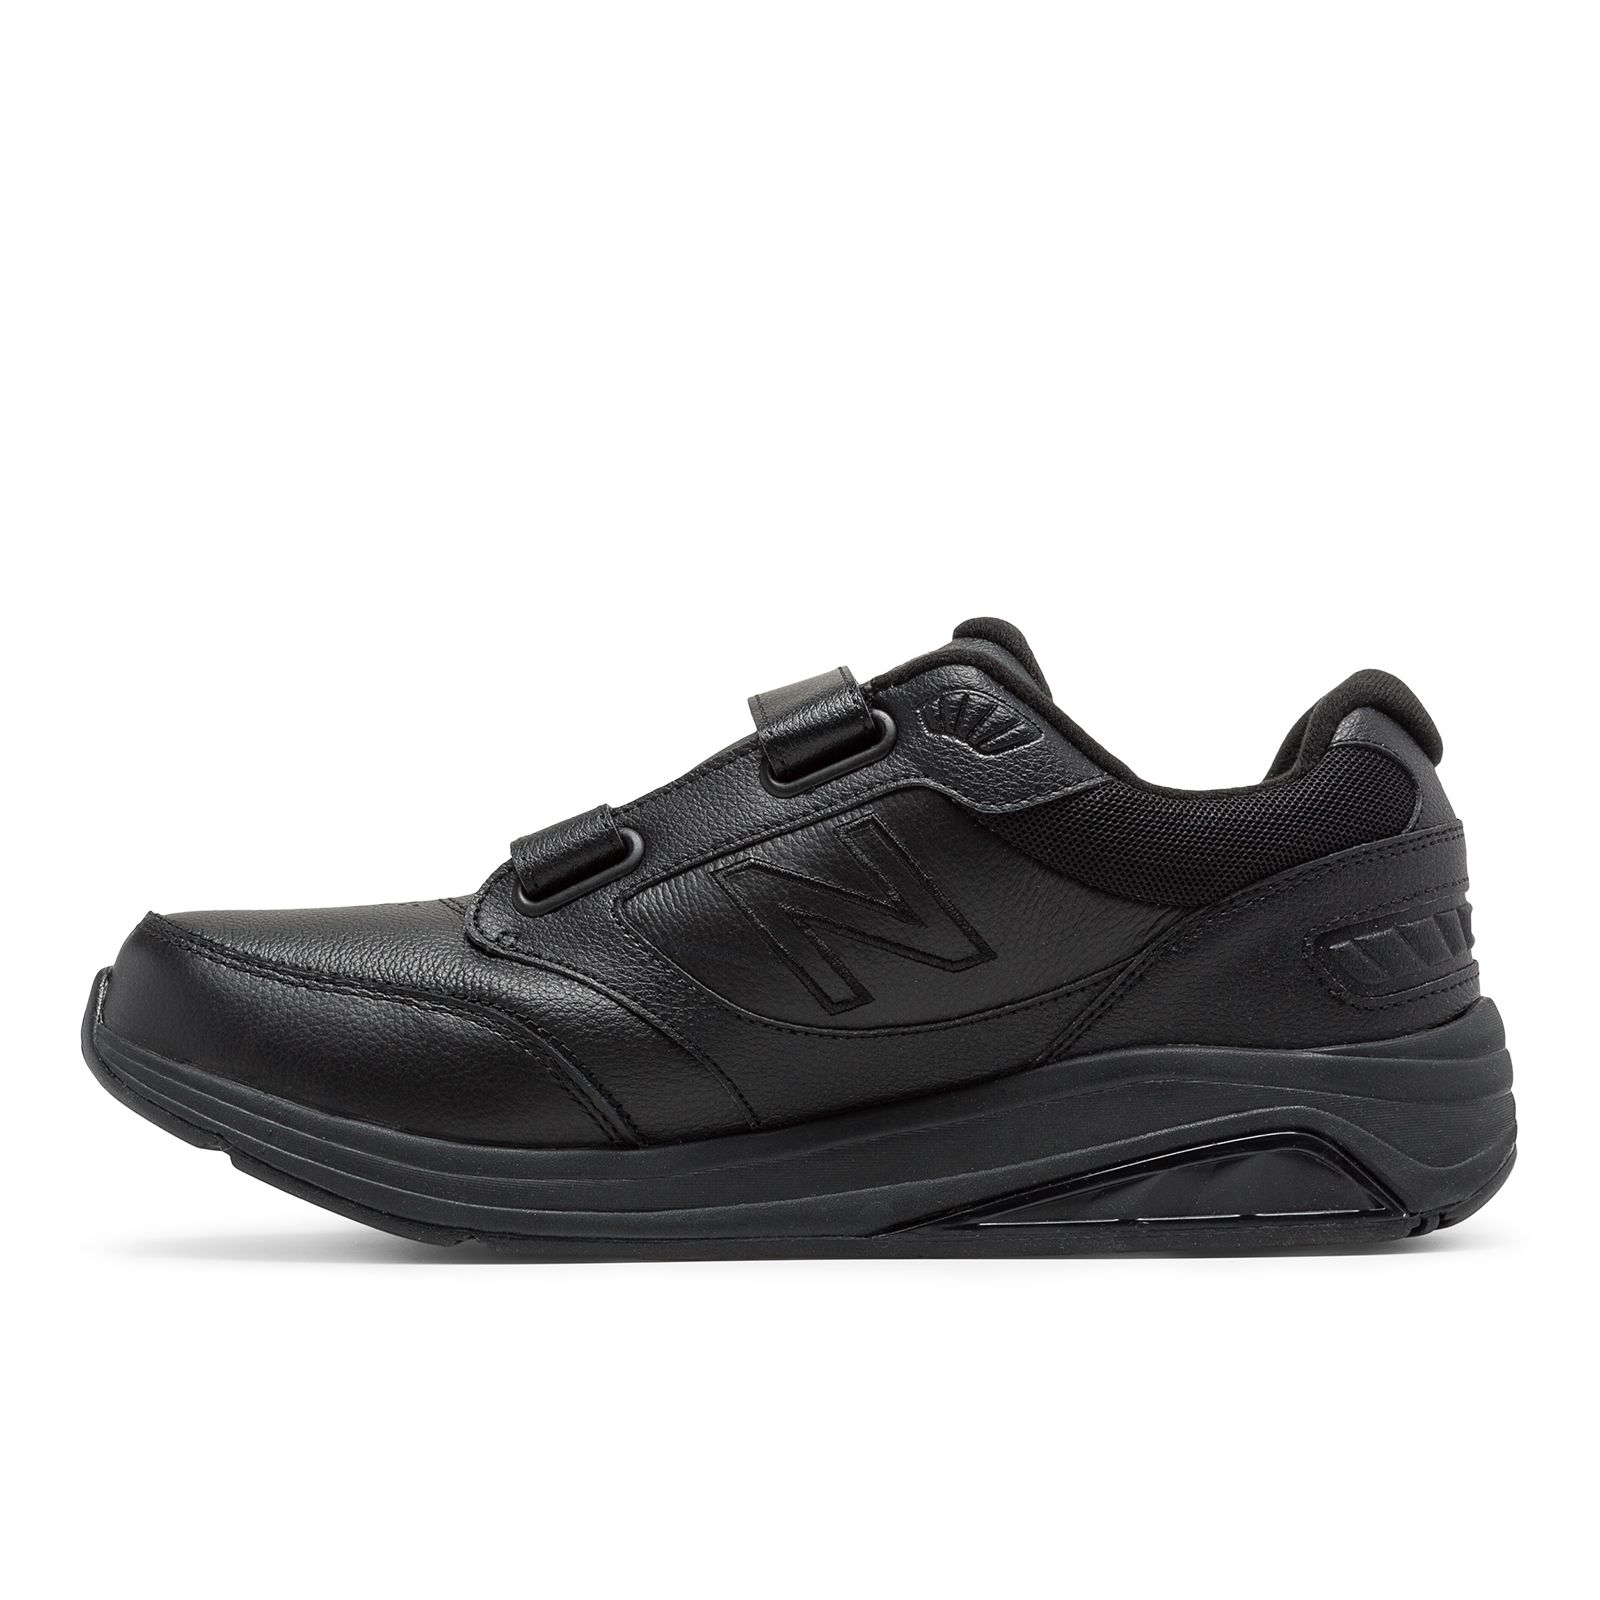 new balance men's hook and loop leather 928v3